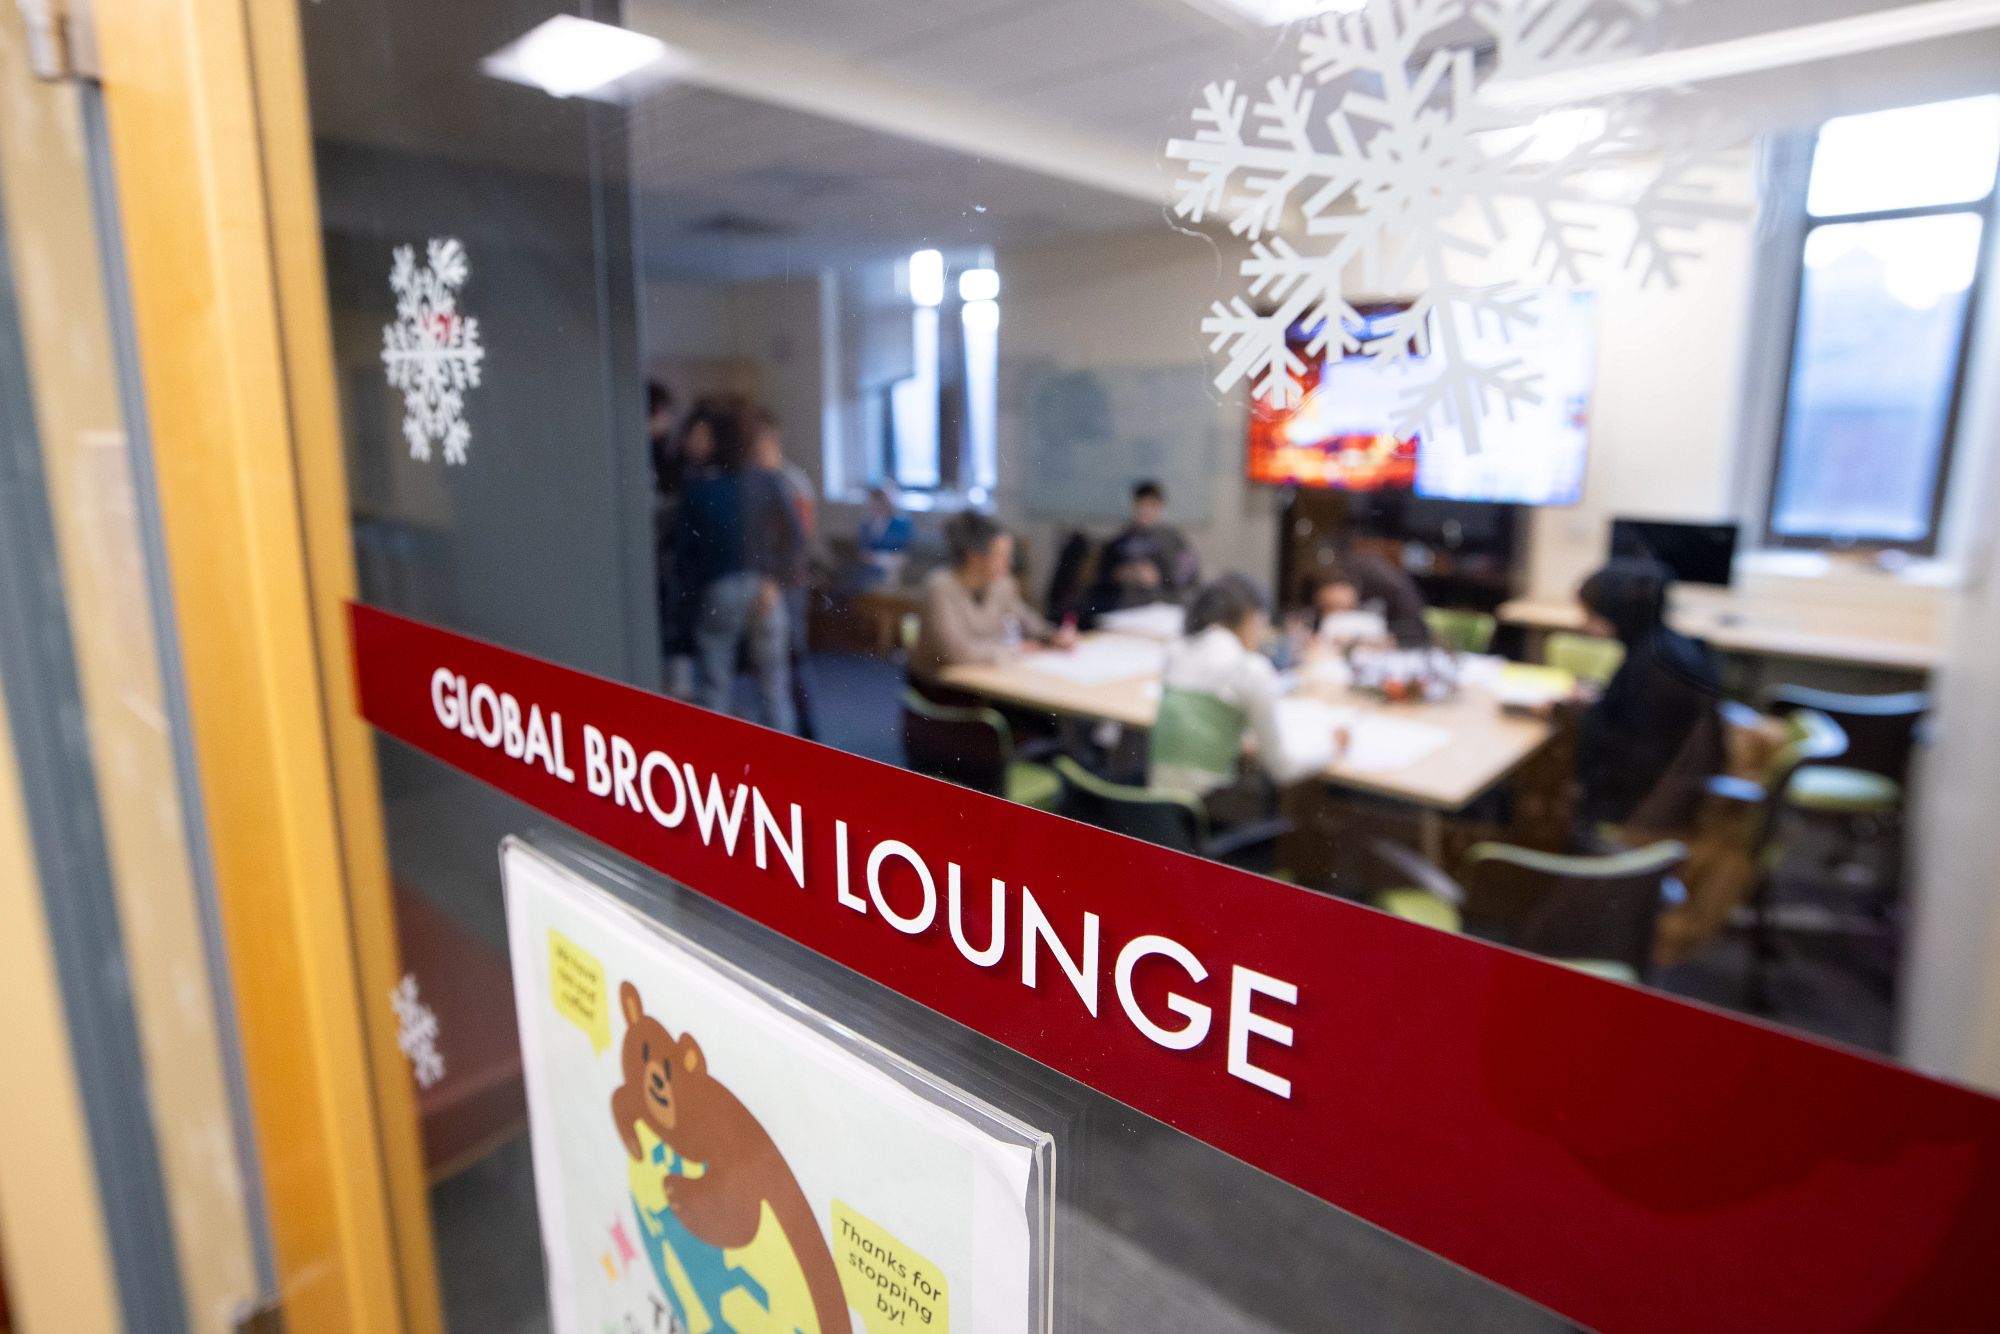 View through the windows of the Global Brown lounge